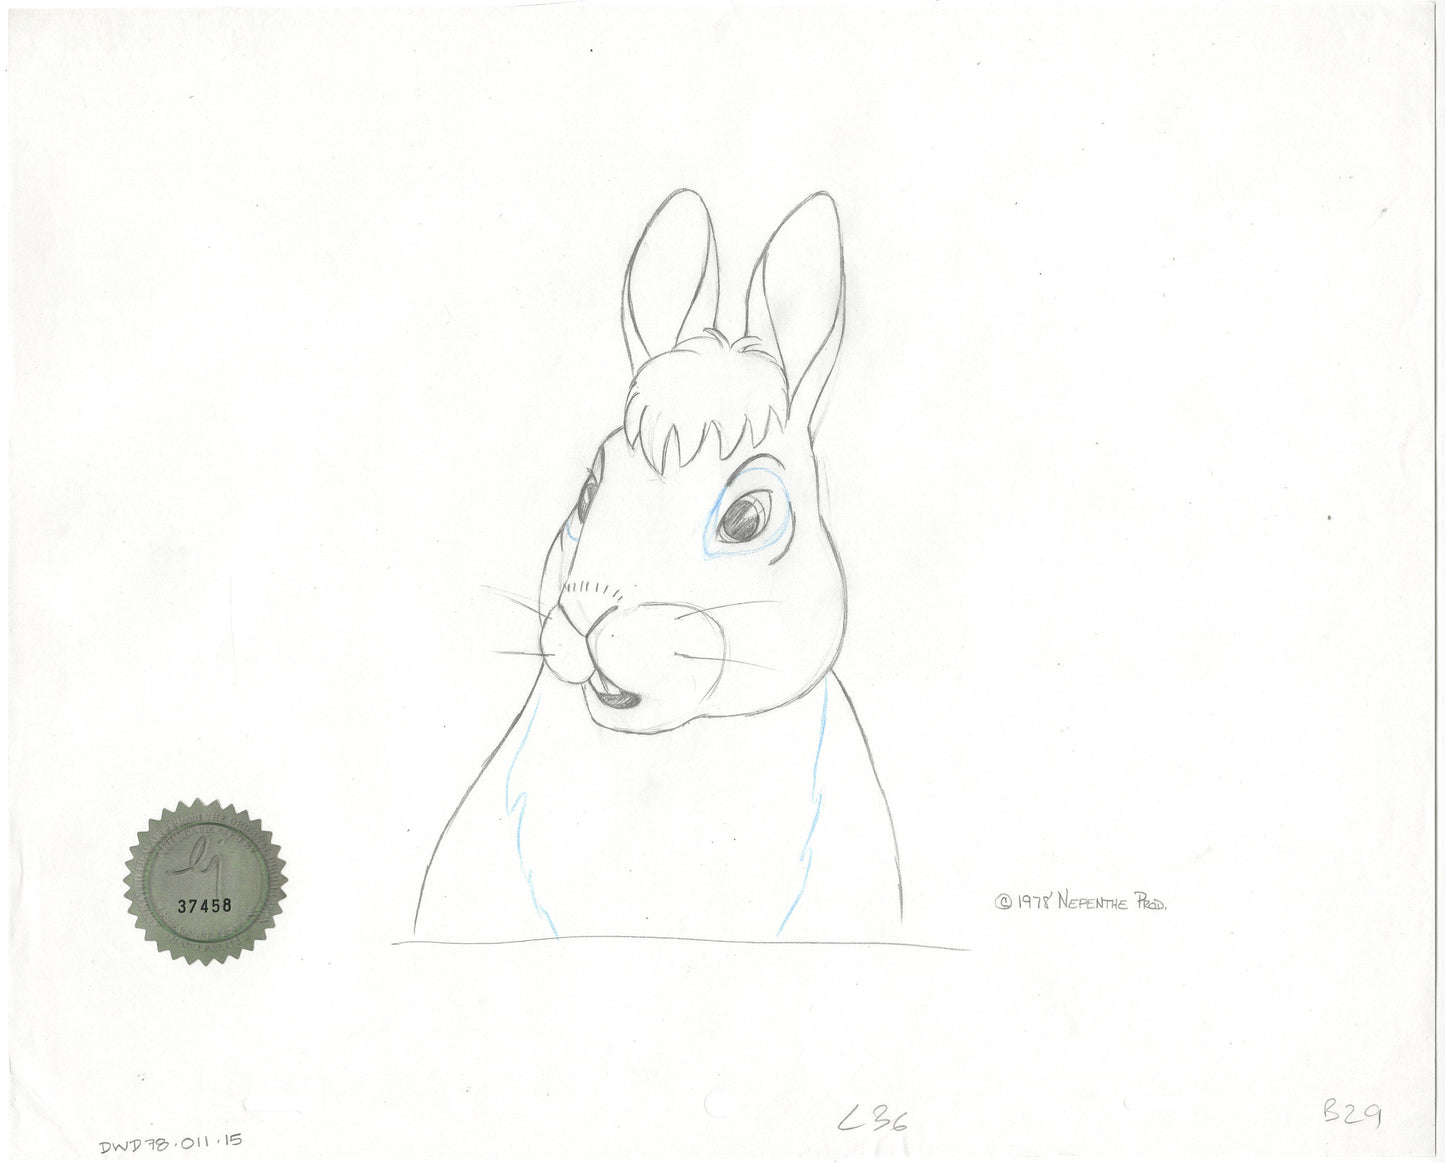 Watership Down 1978 Production Animation Cel Drawing of Bigwig with Linda Jones Enterprise Seal and Certificate of Authenticity 011-015